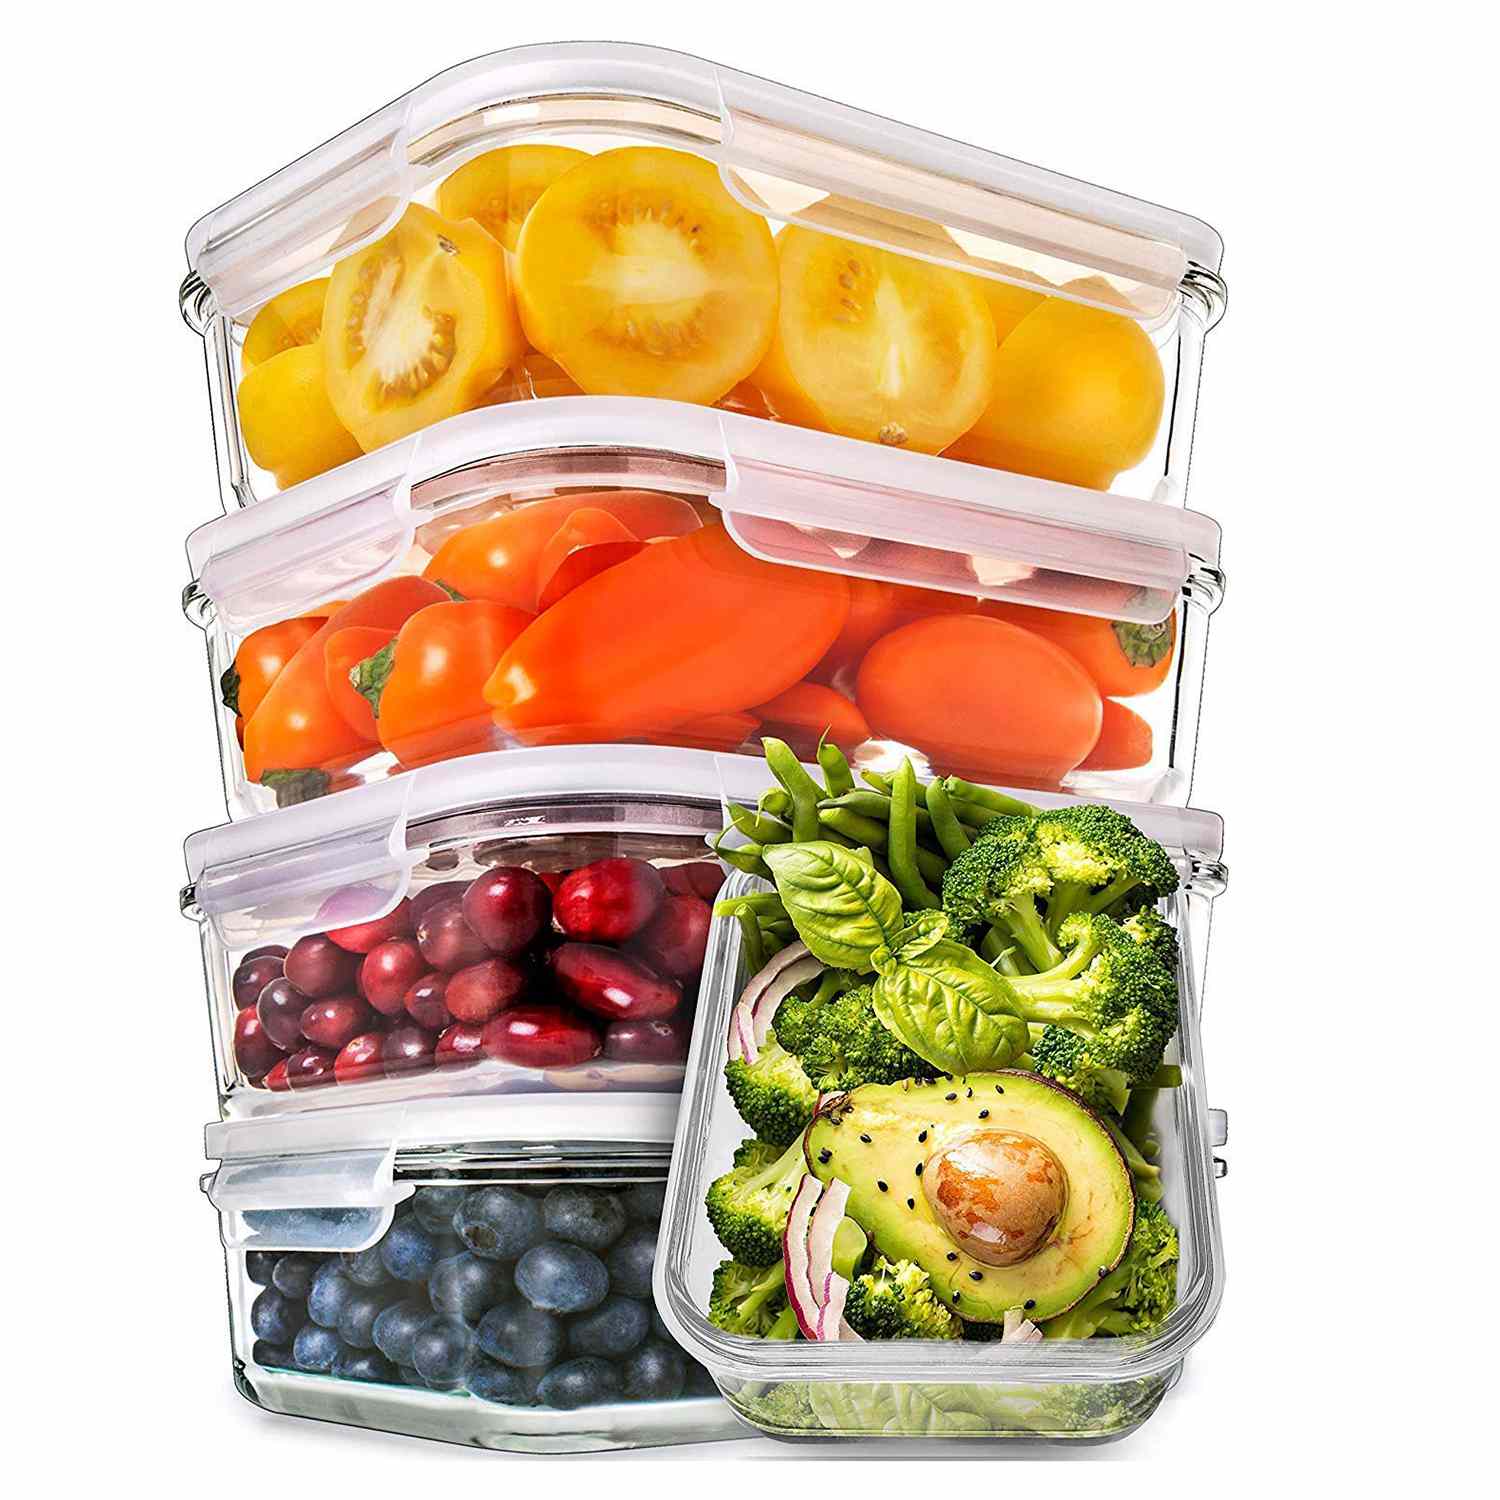 Details about   10 MEAL PREP 2 COMPARTMENT STACKABLE LUNCH FOOD CONTAINERS LID DIET PLAN CLEAR 